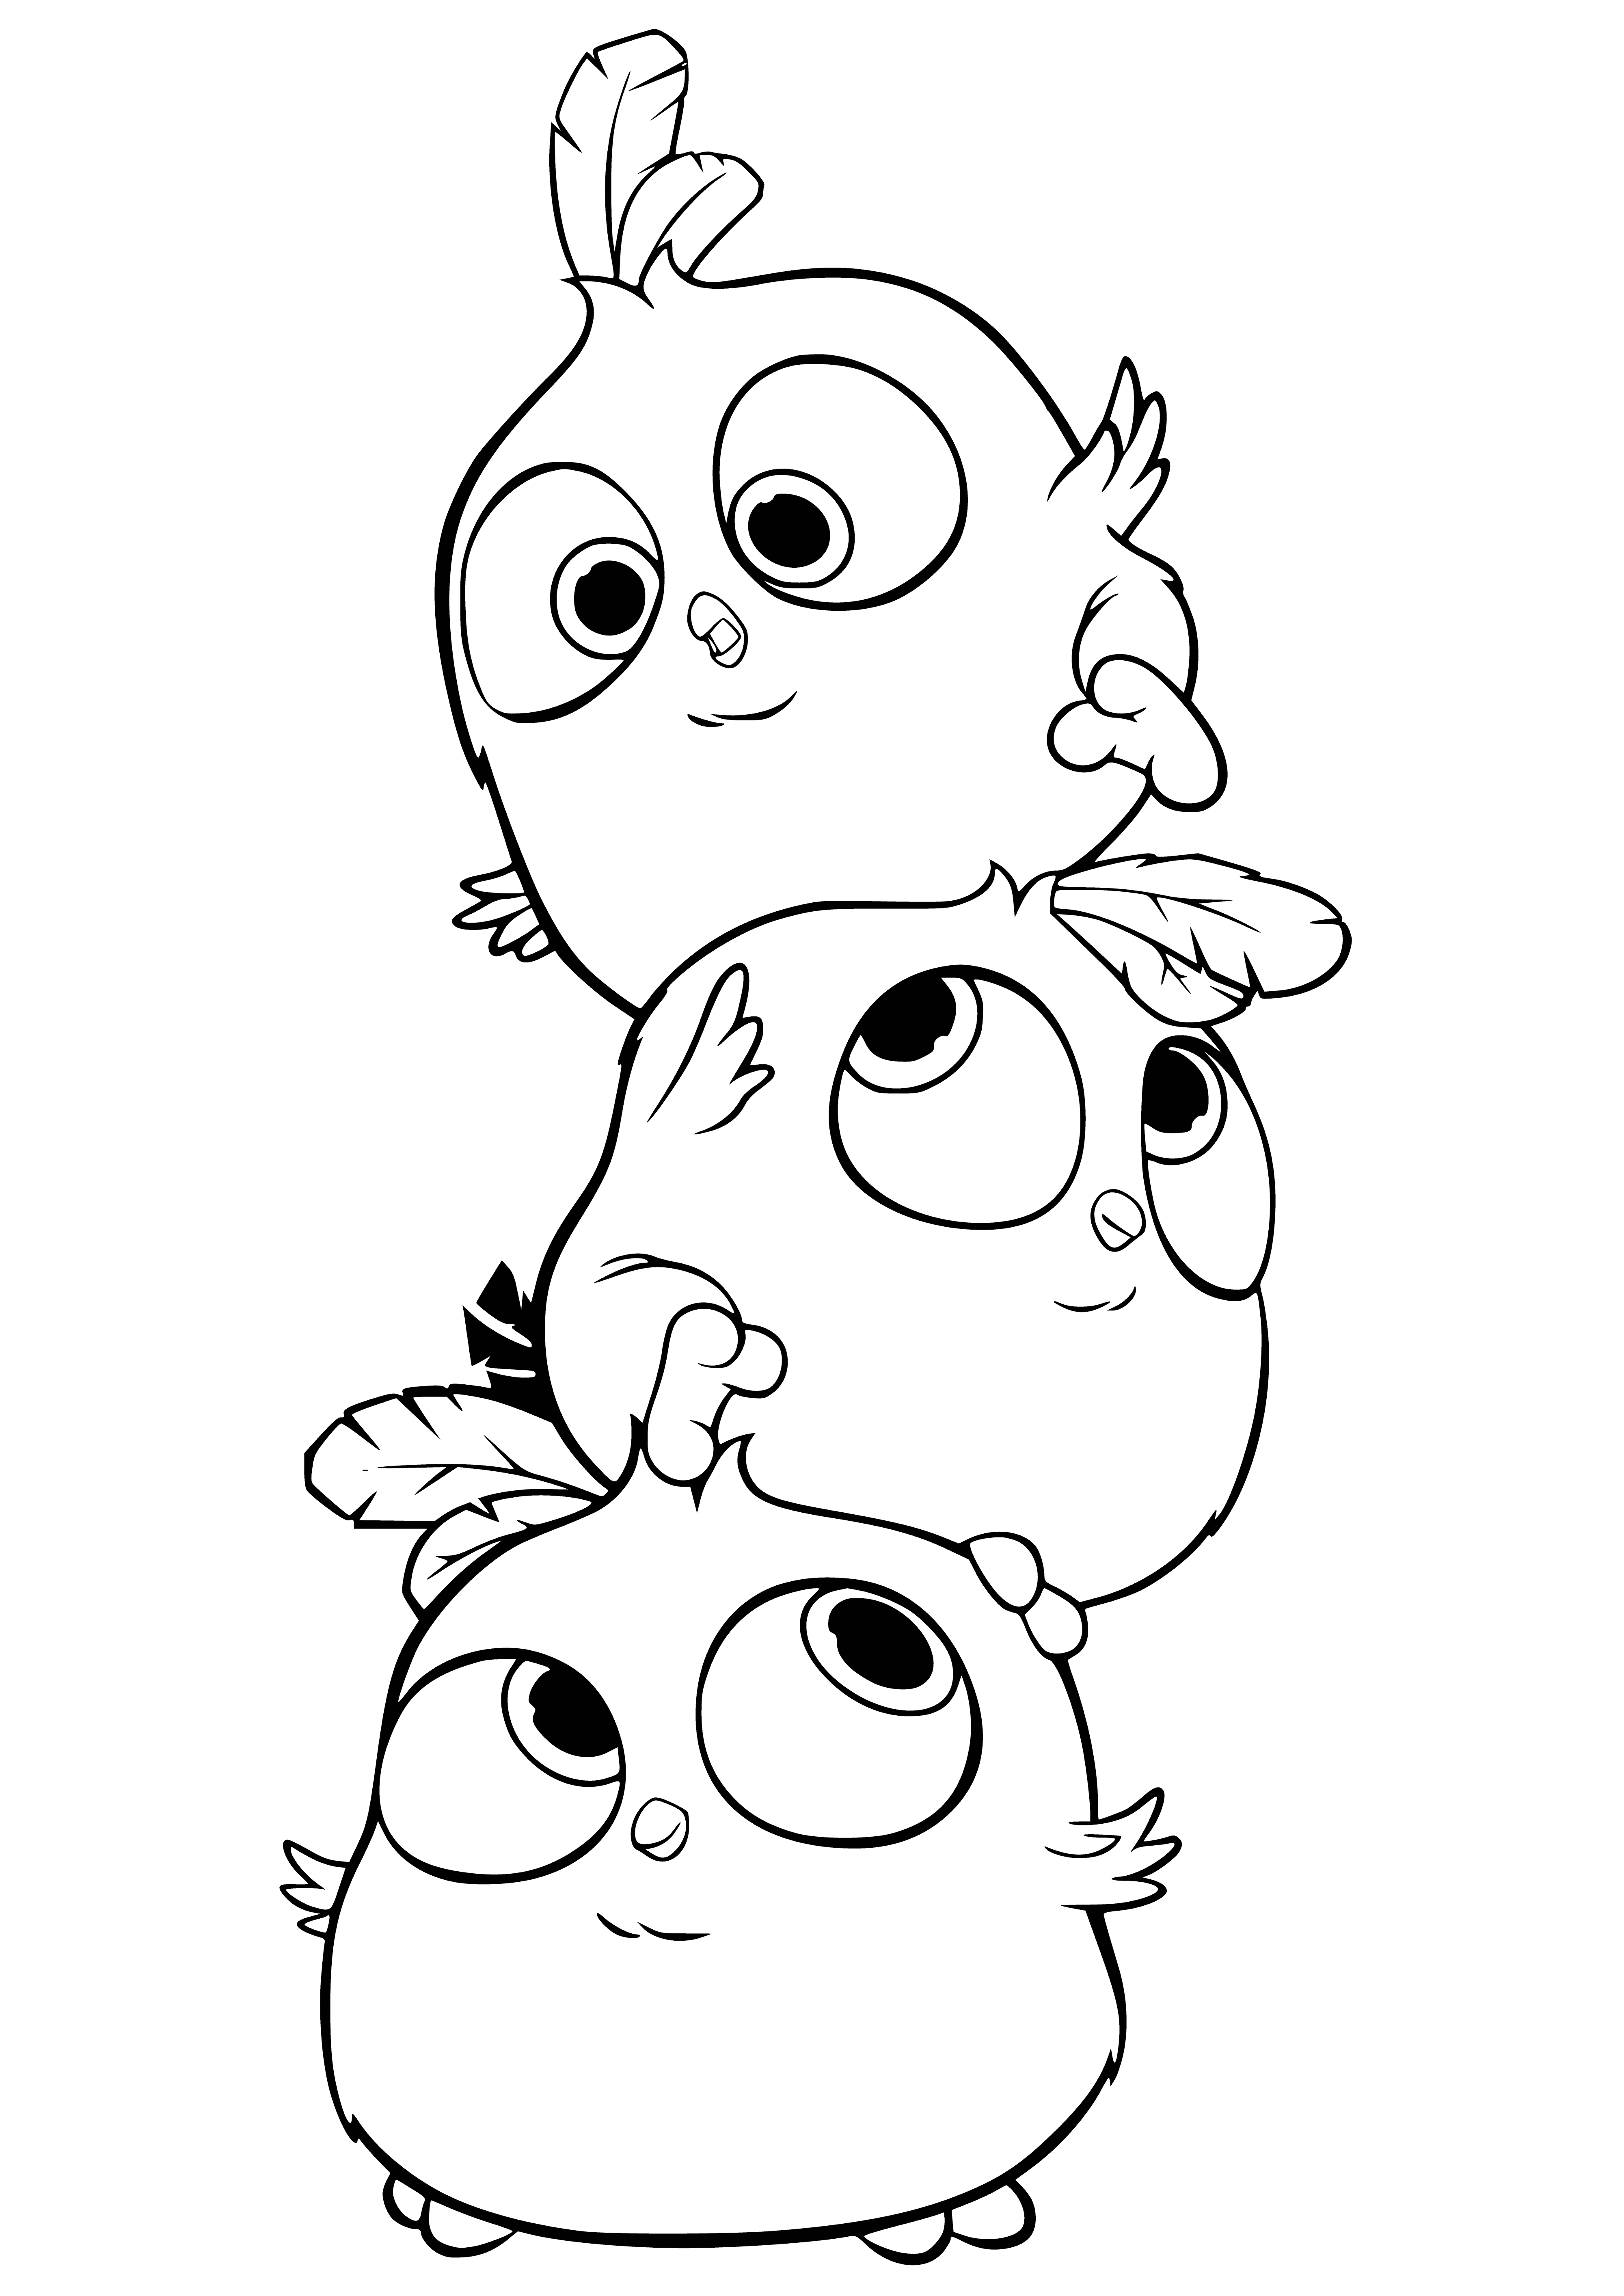 coloring page: Popular mobile game Angry Birds has you hurl birds at pigs to destroy them with the blue bird, which splits in mid-flight for greater coverage and damage.